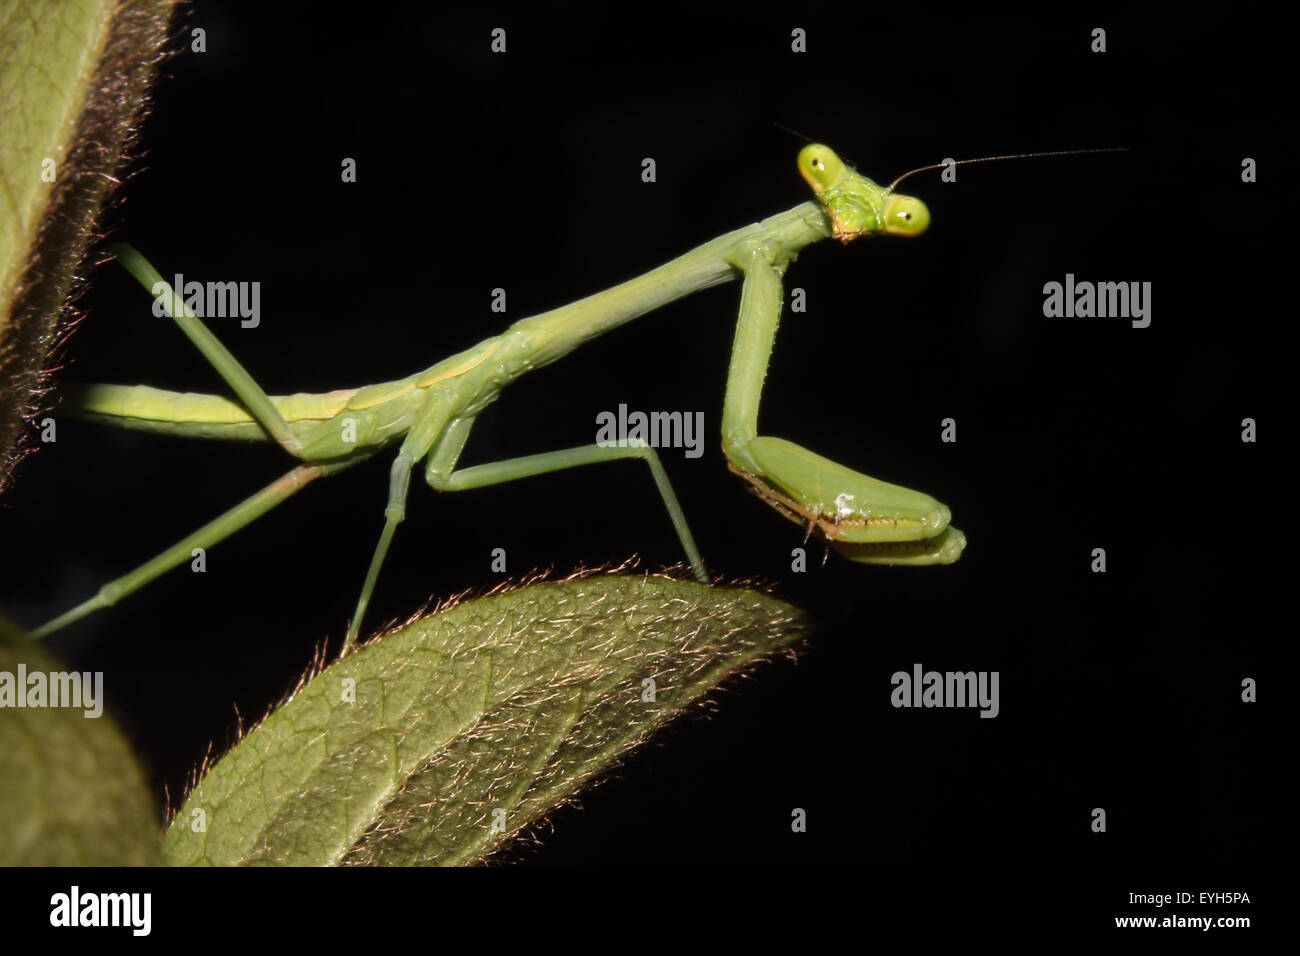 A Praying mantis moves about the foliage. Stock Photo